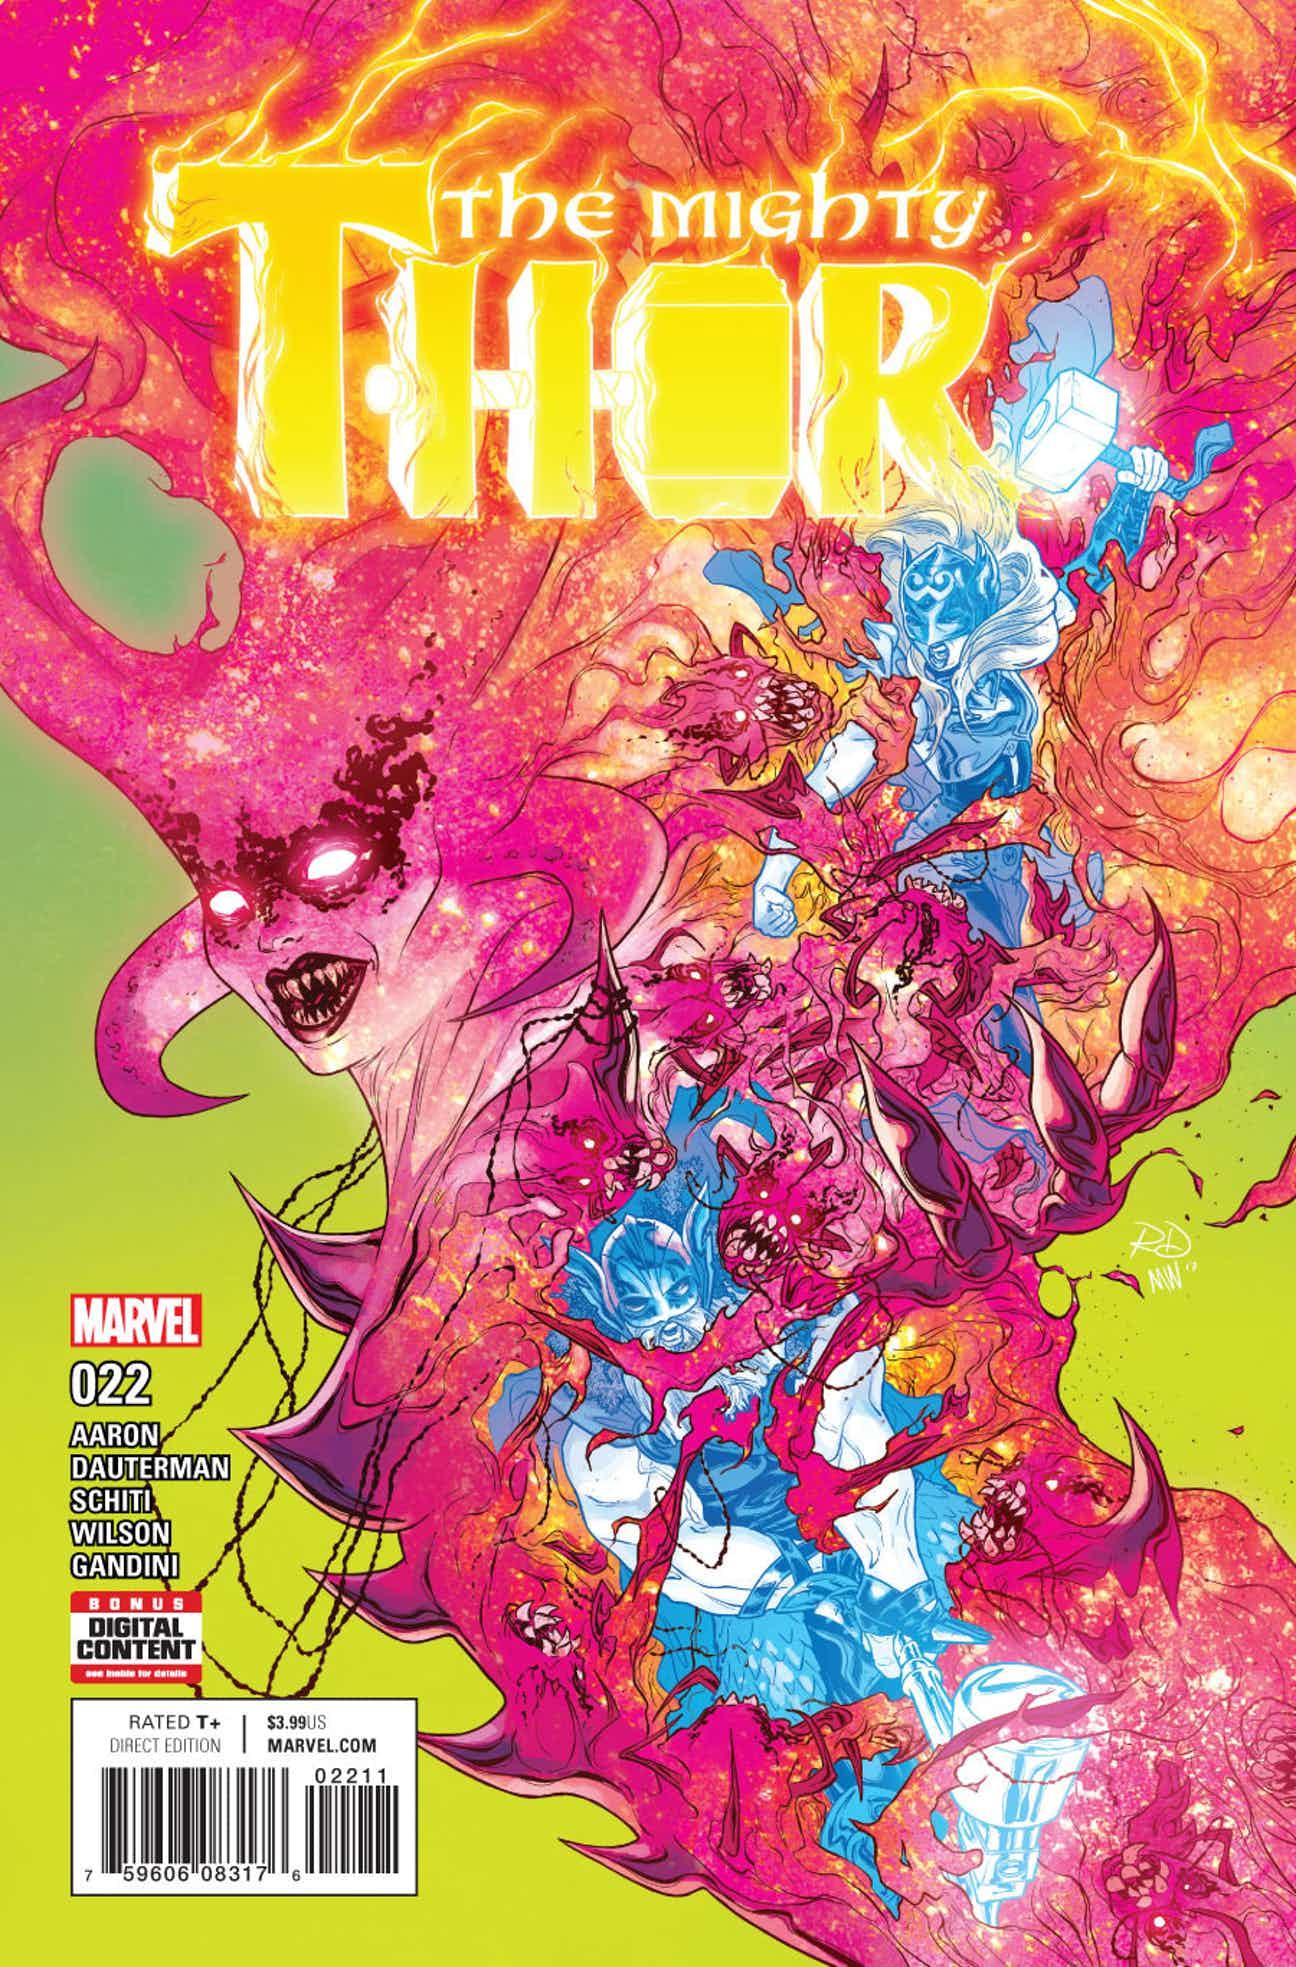 The Mighty Thor Vol. 2 #22